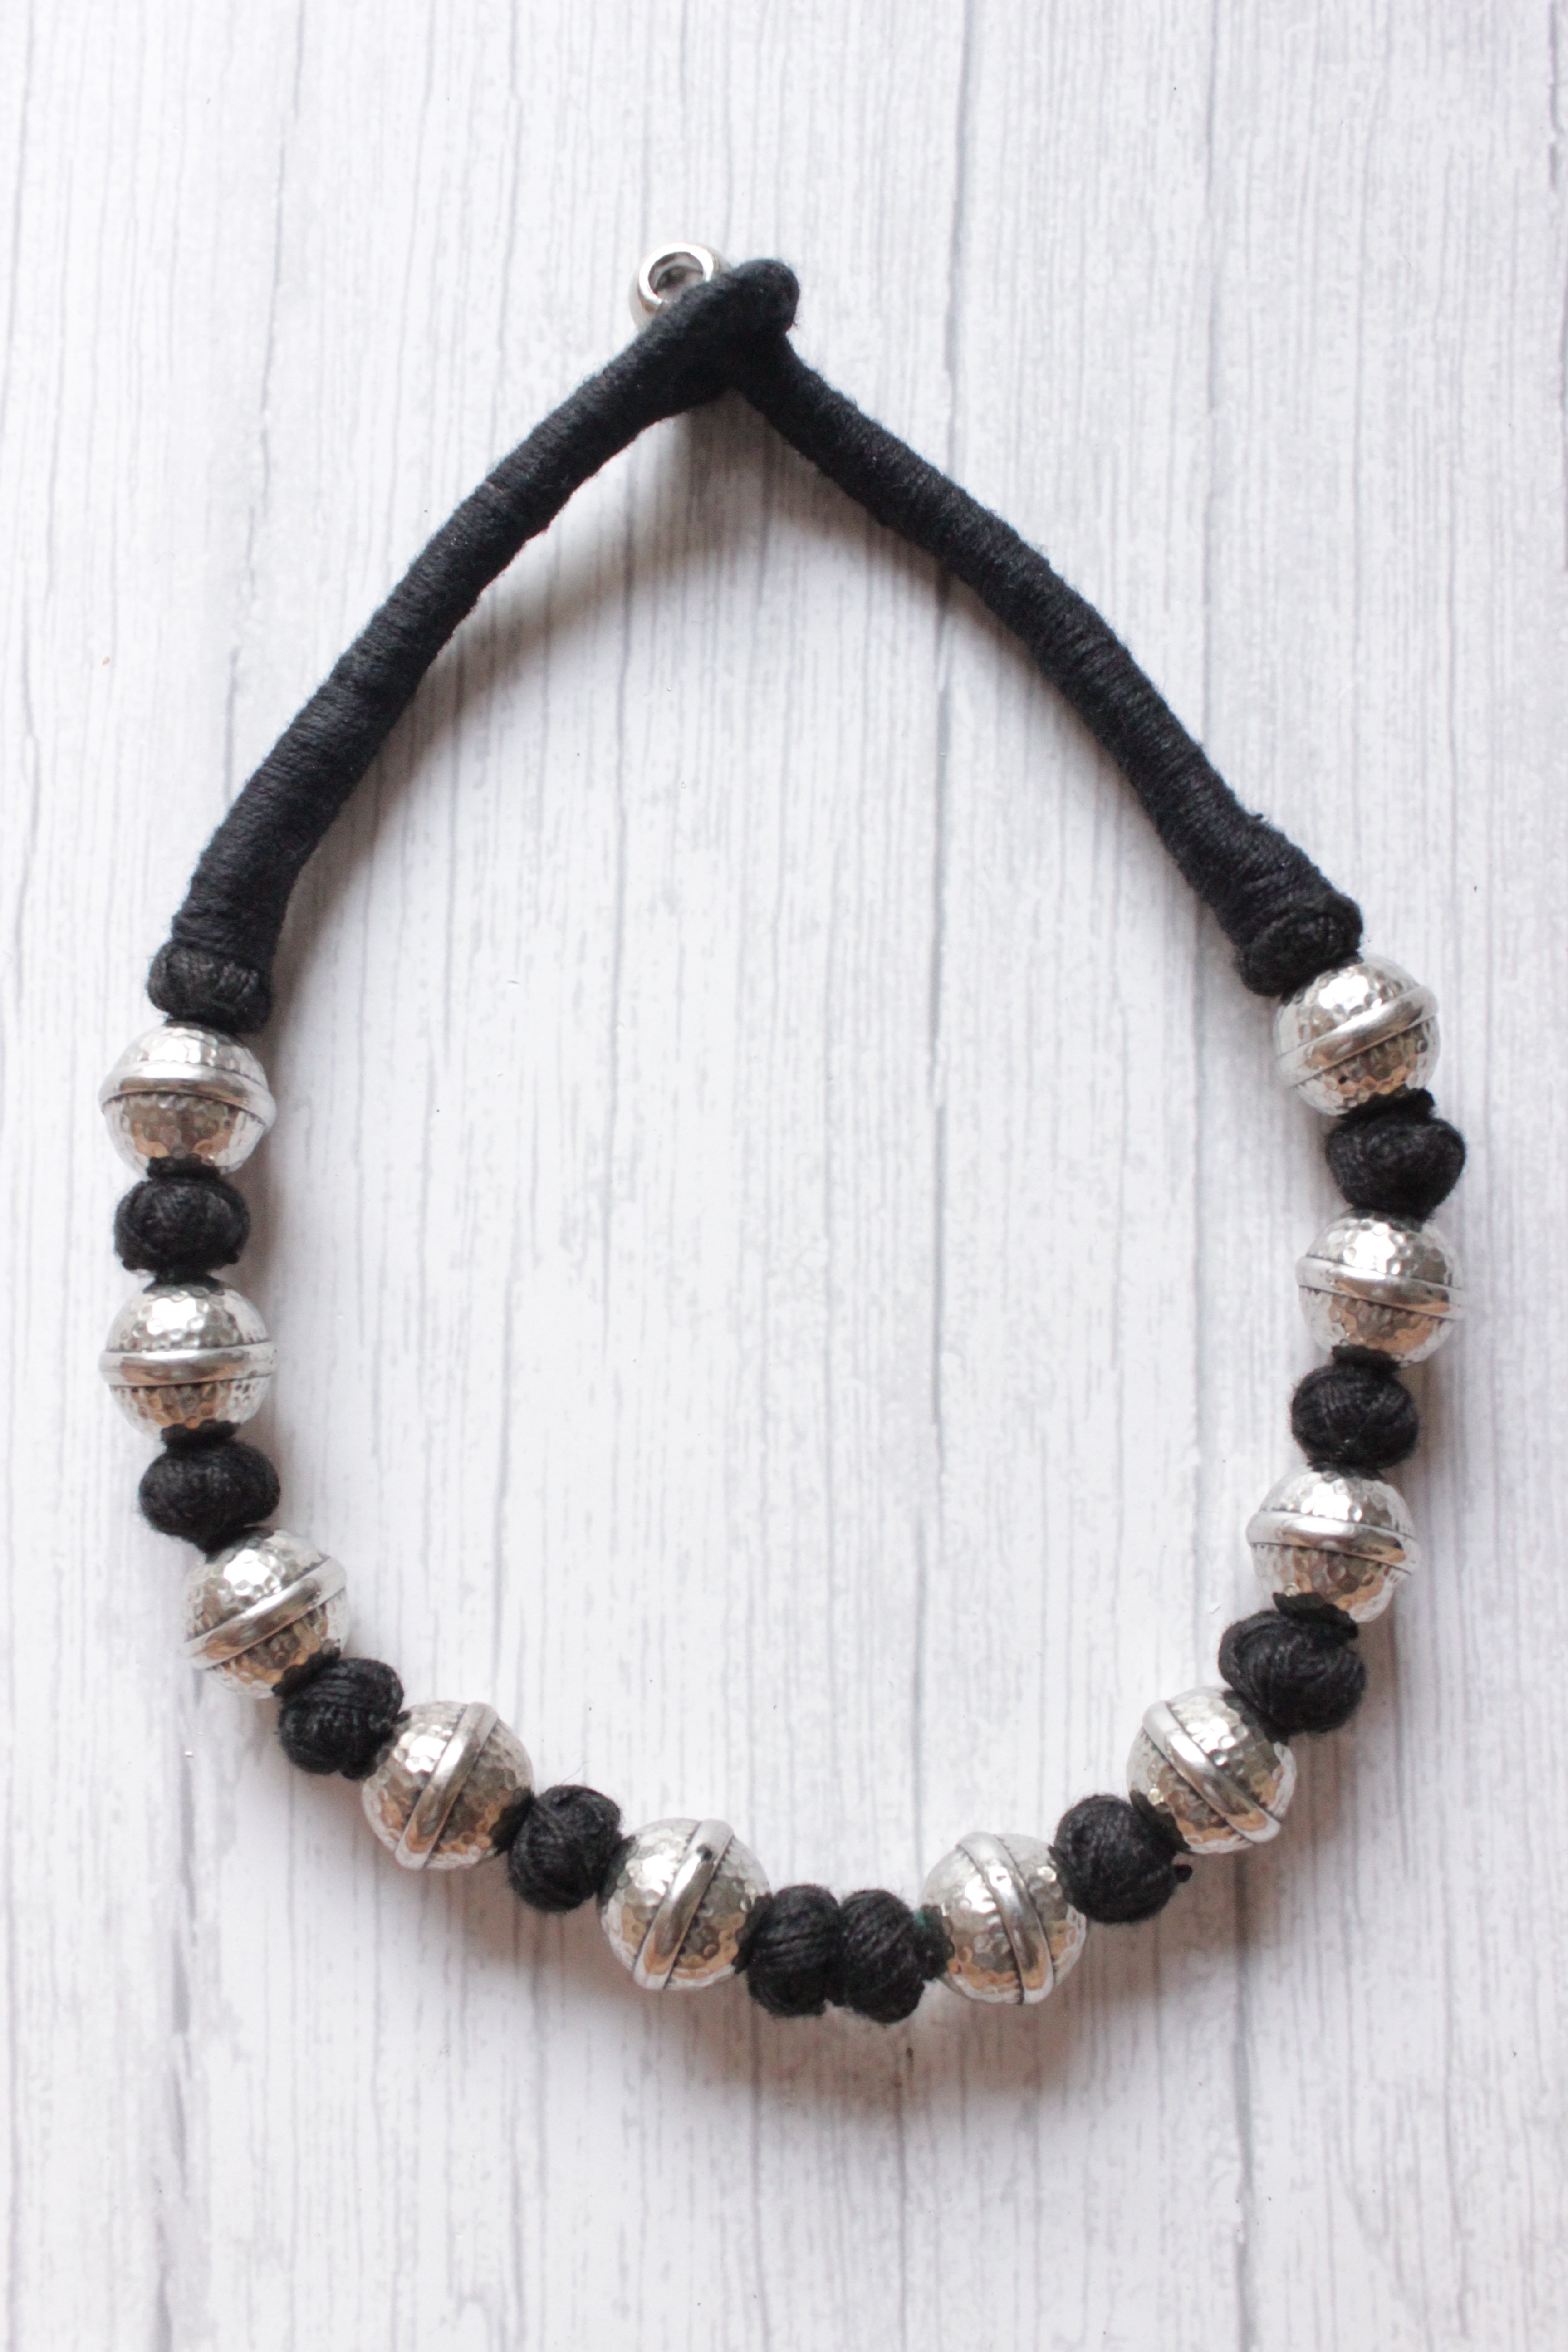 Black Fabric Beads and Oxidised Finish Metal Charms Choker Necklace